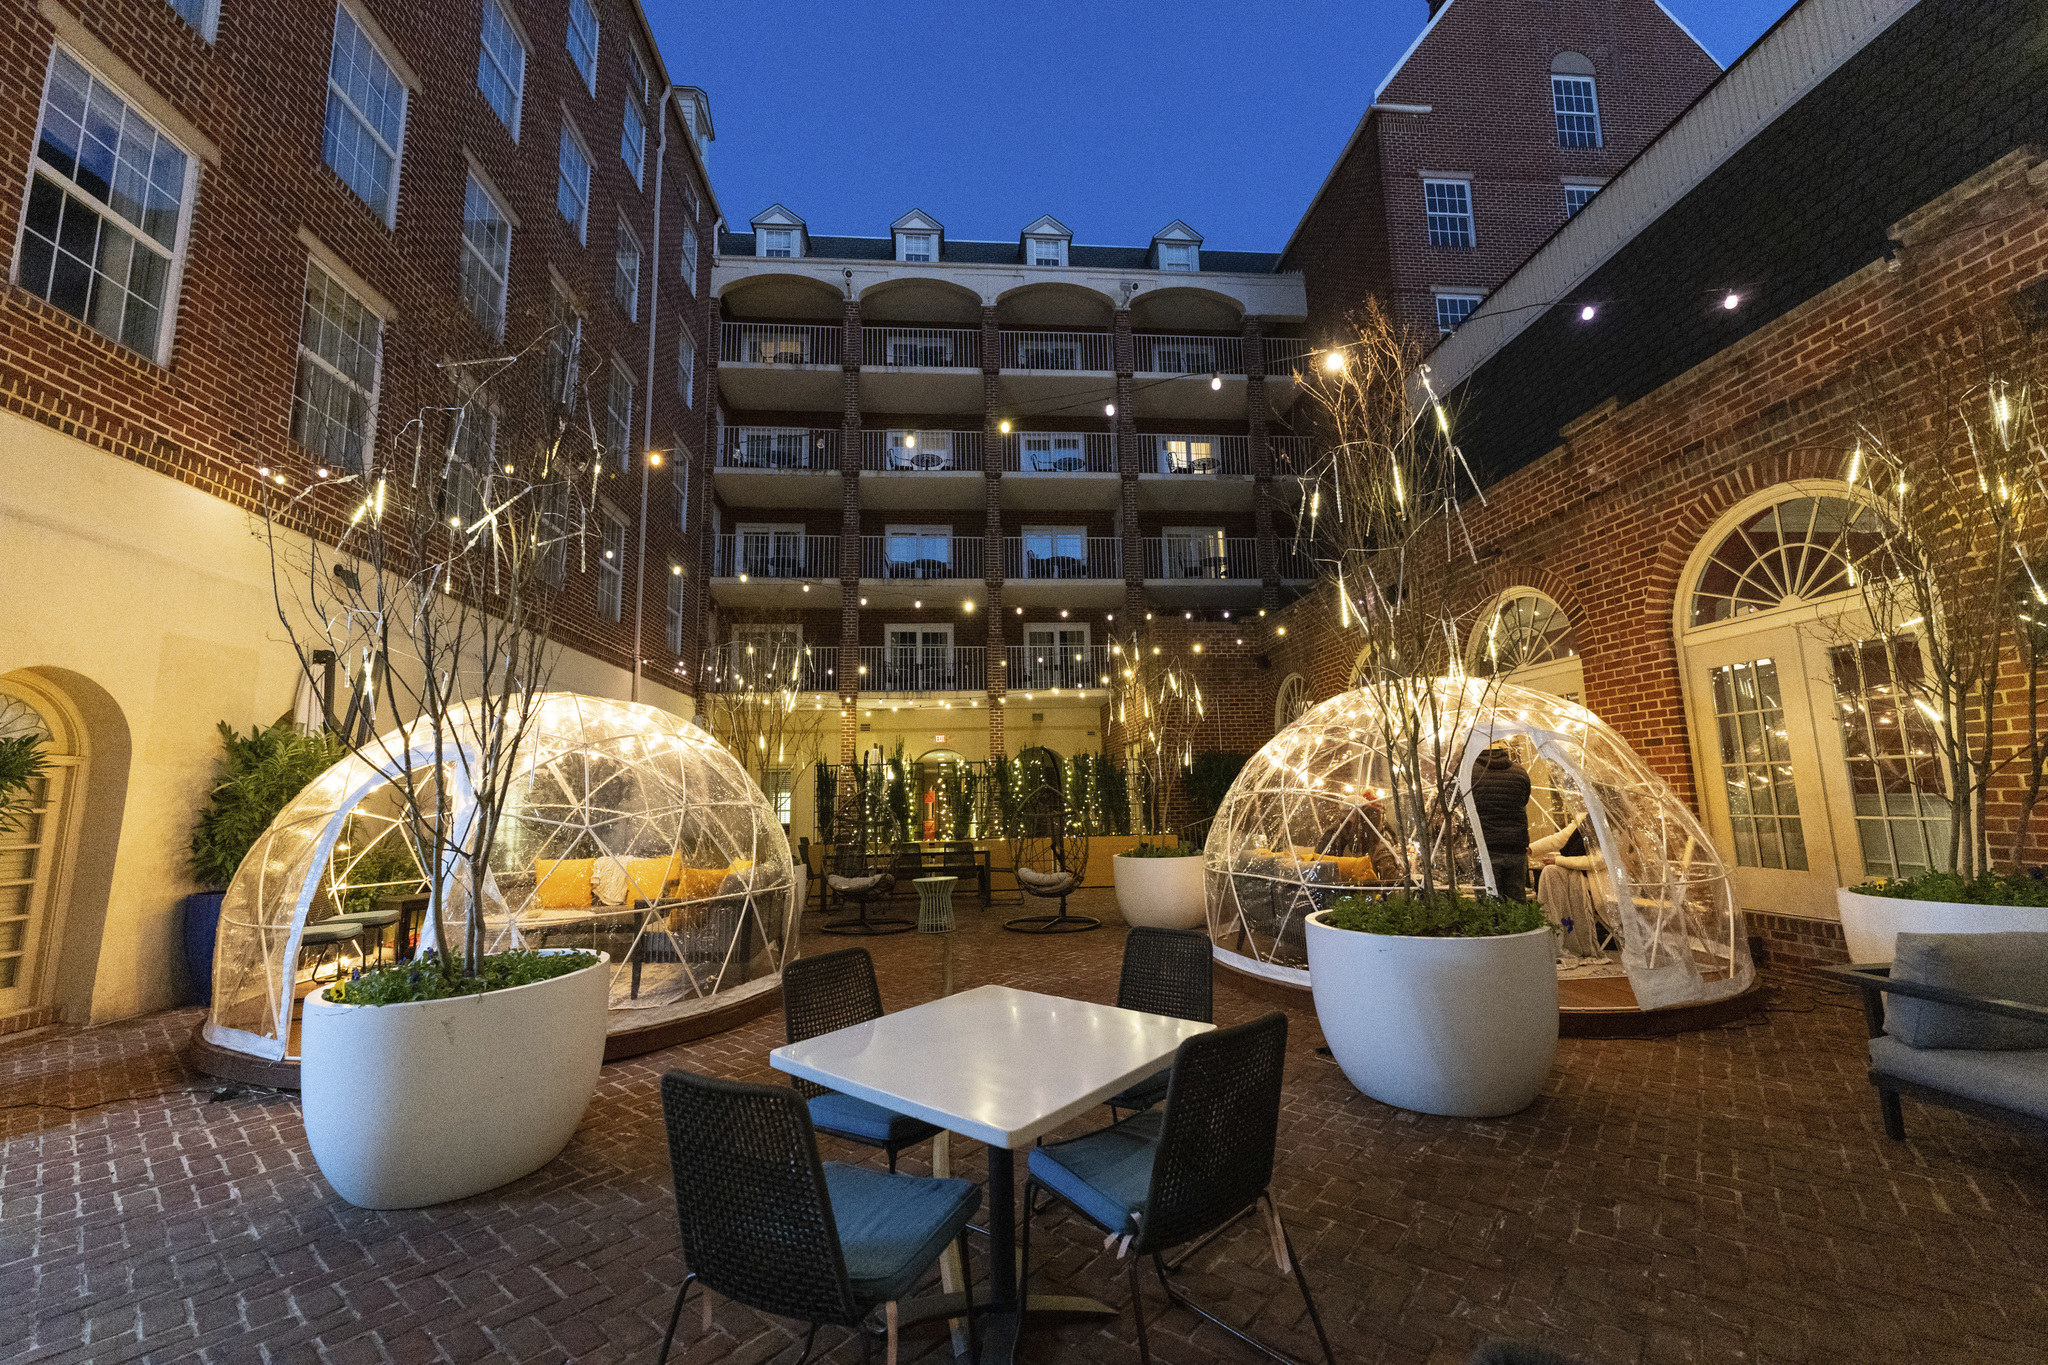 Temperature controlled outdoor igloos in a hotel courtyard